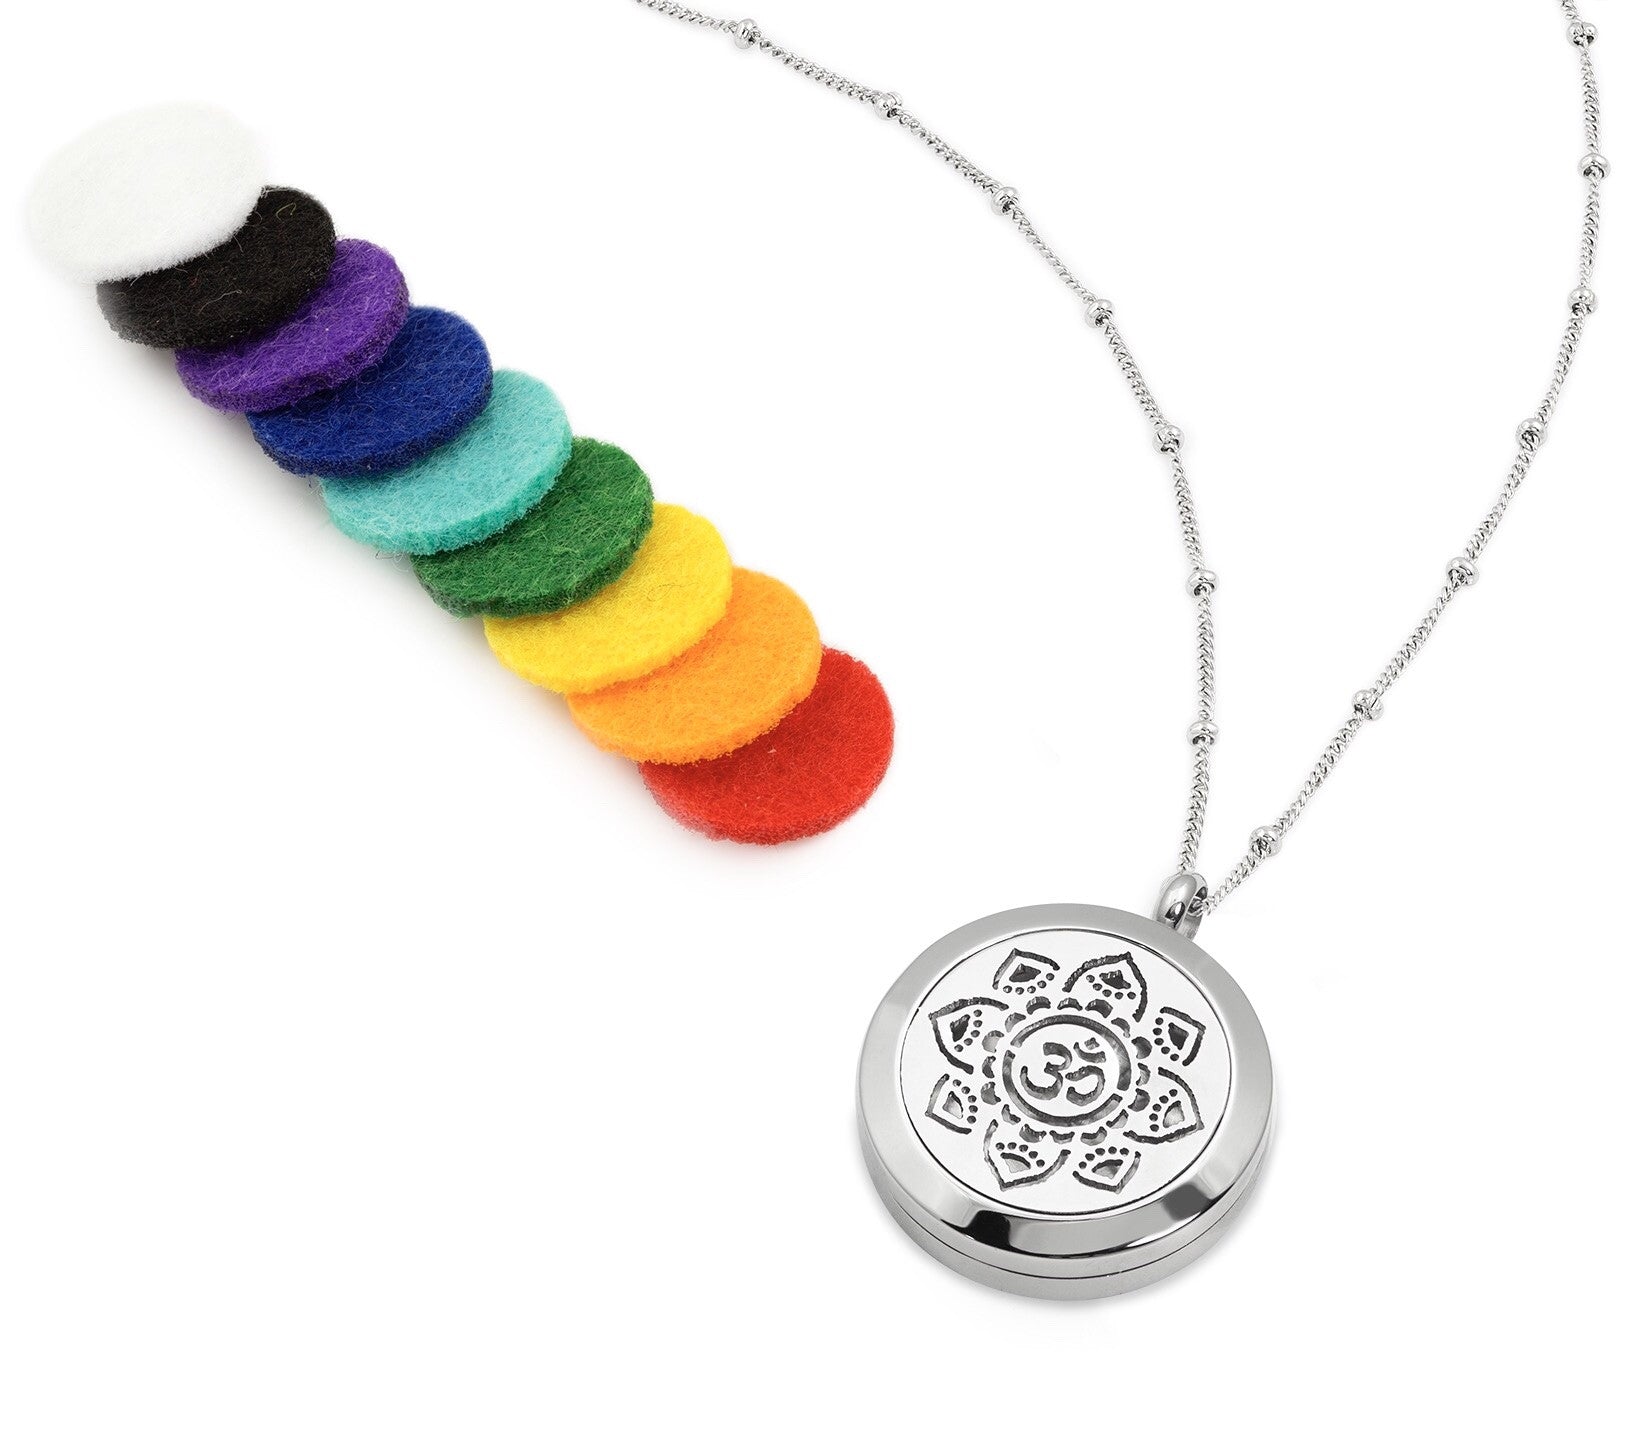 004) Silver Aum/Om Aromatherapy / Essential Oils Diffuser Necklace